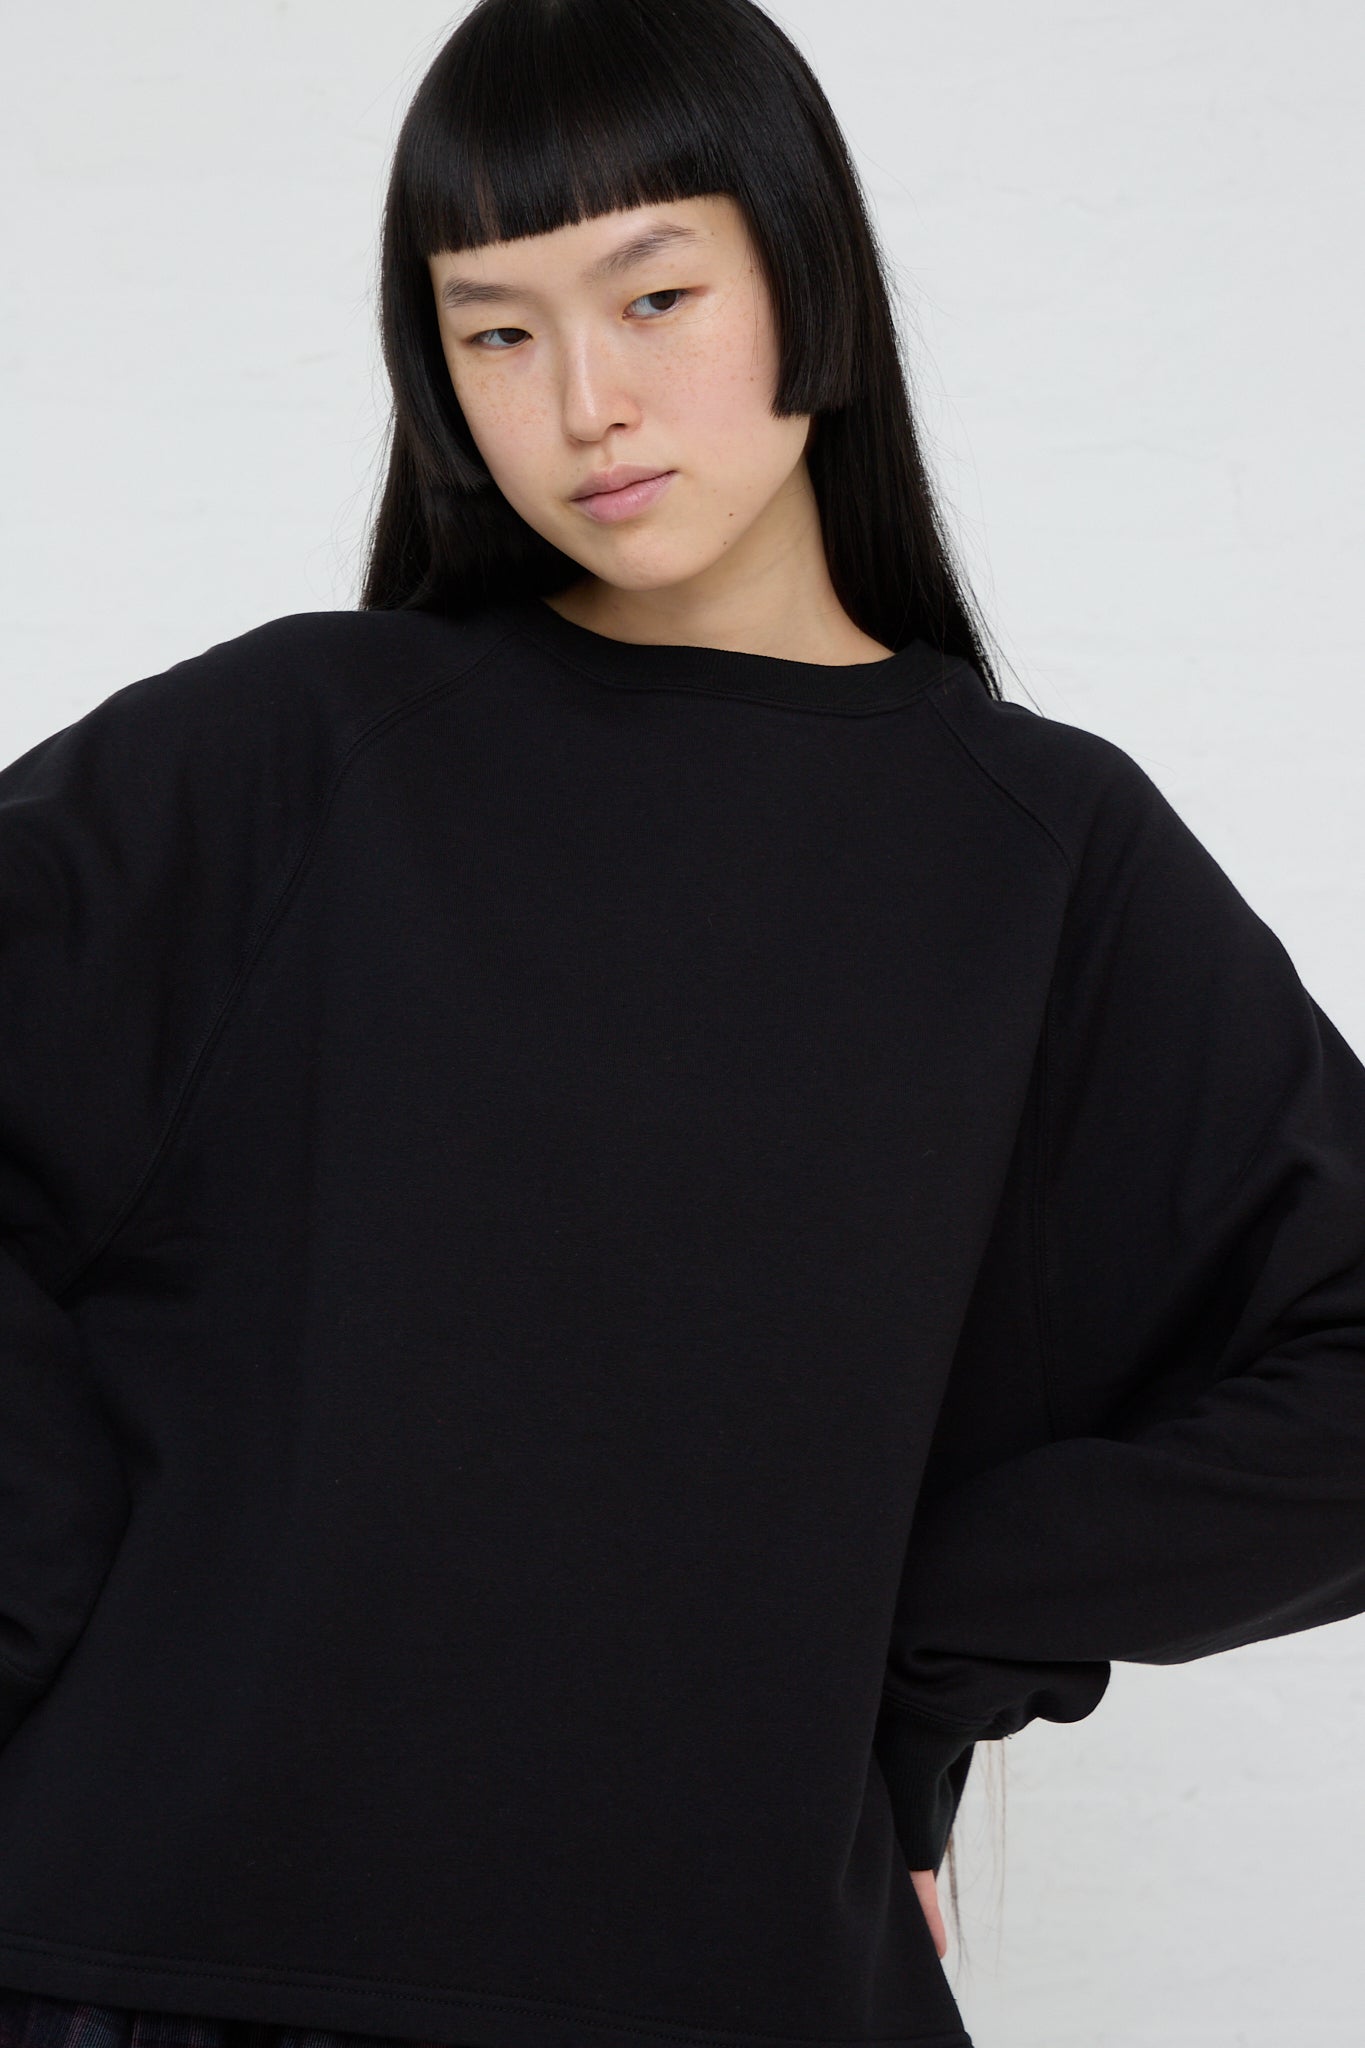 A model wearing an Ichi Cotton Knit Pullover in Black. Up close and front view.